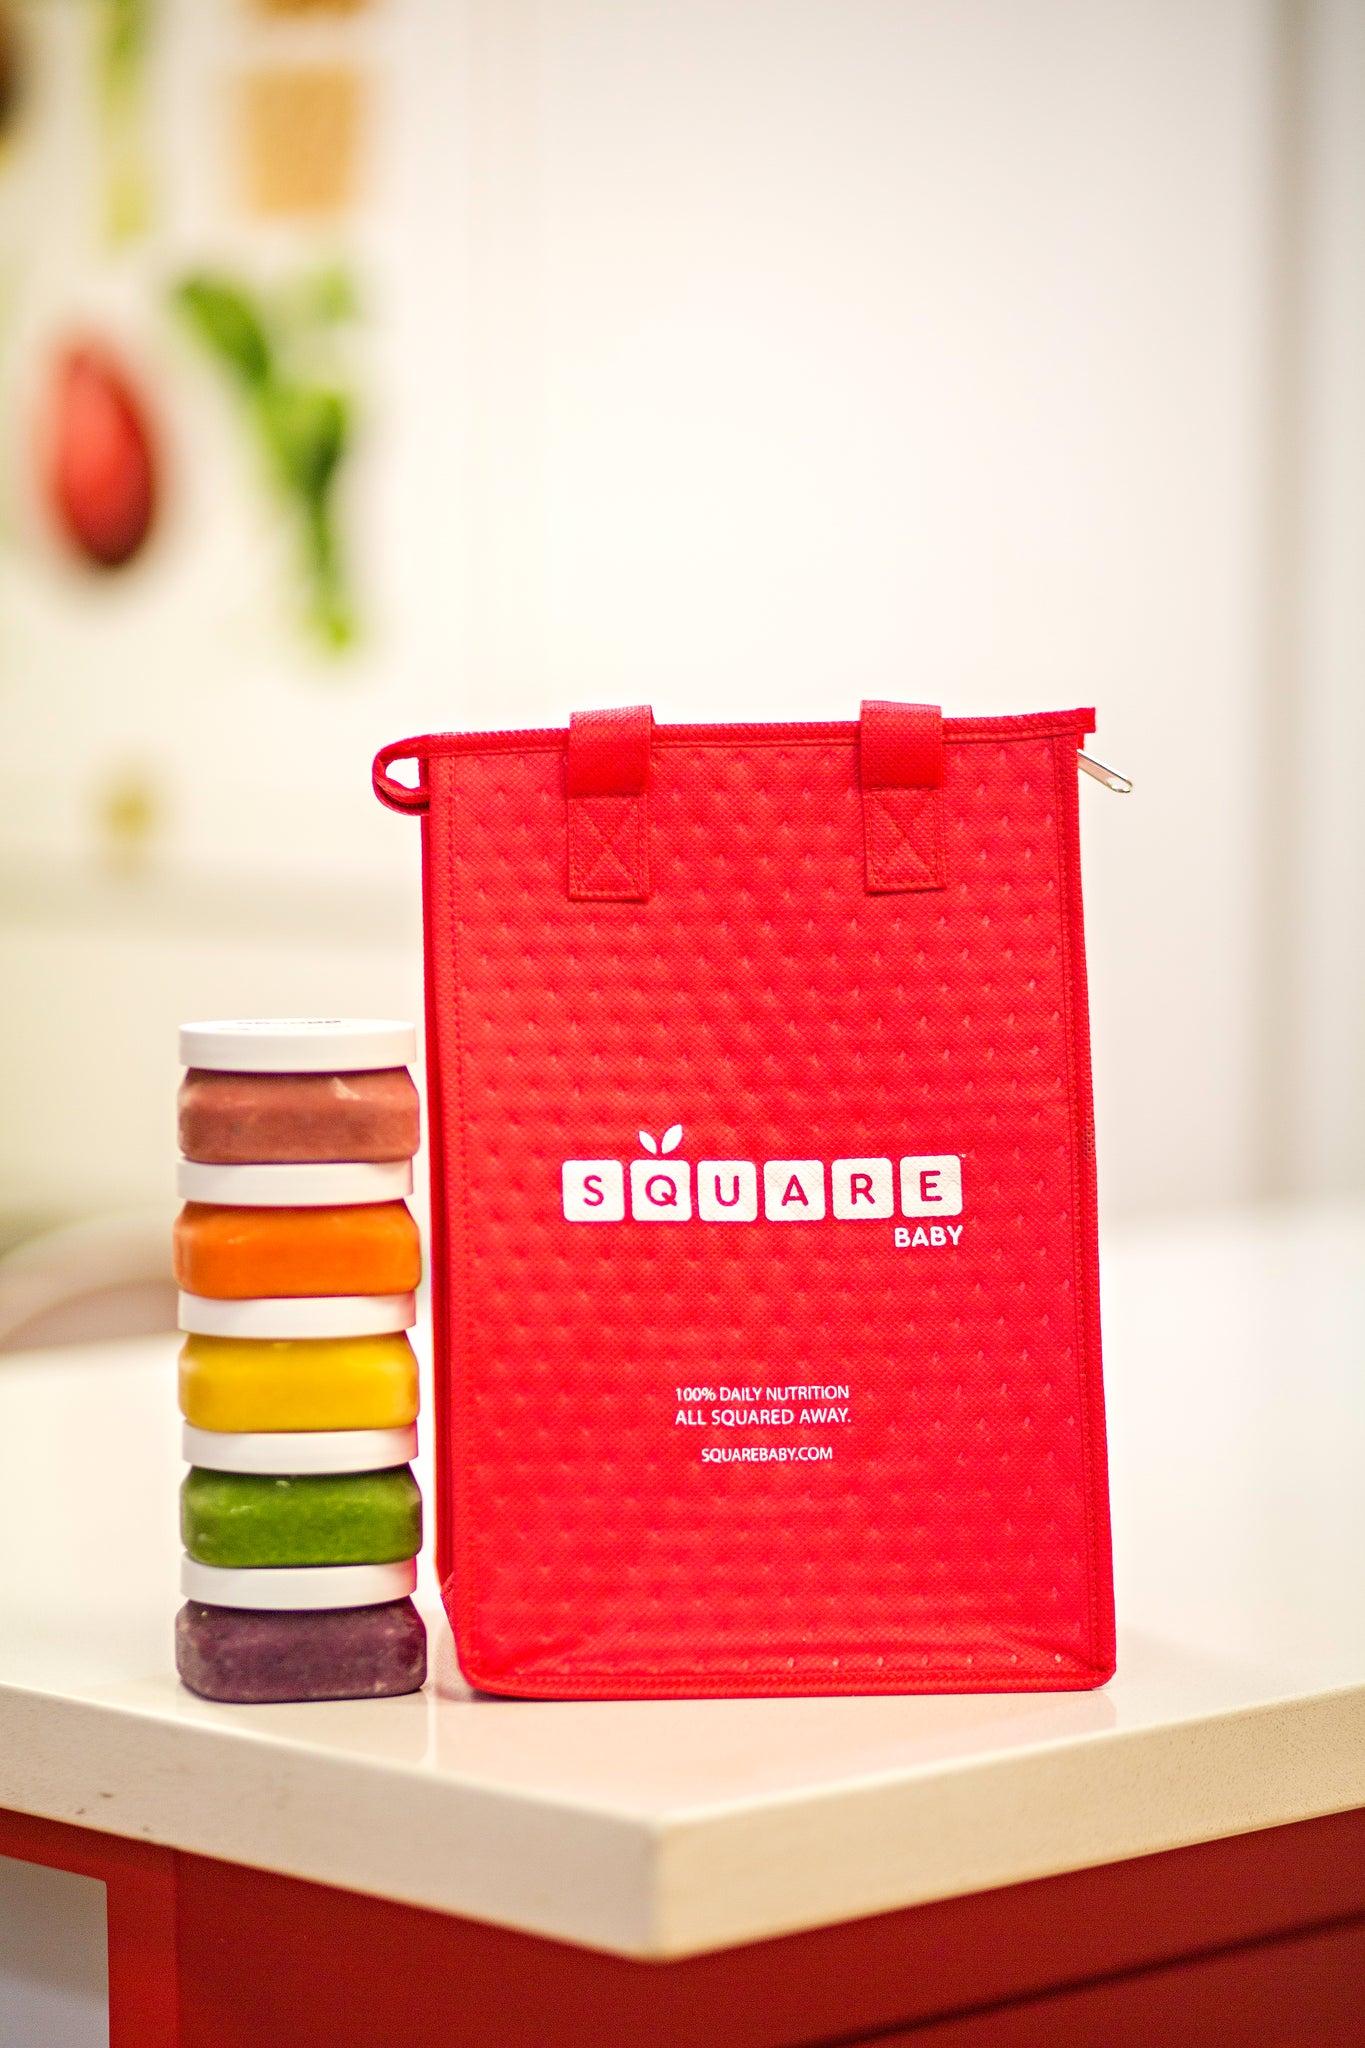 Square Baby - fresh and organic baby food delivered